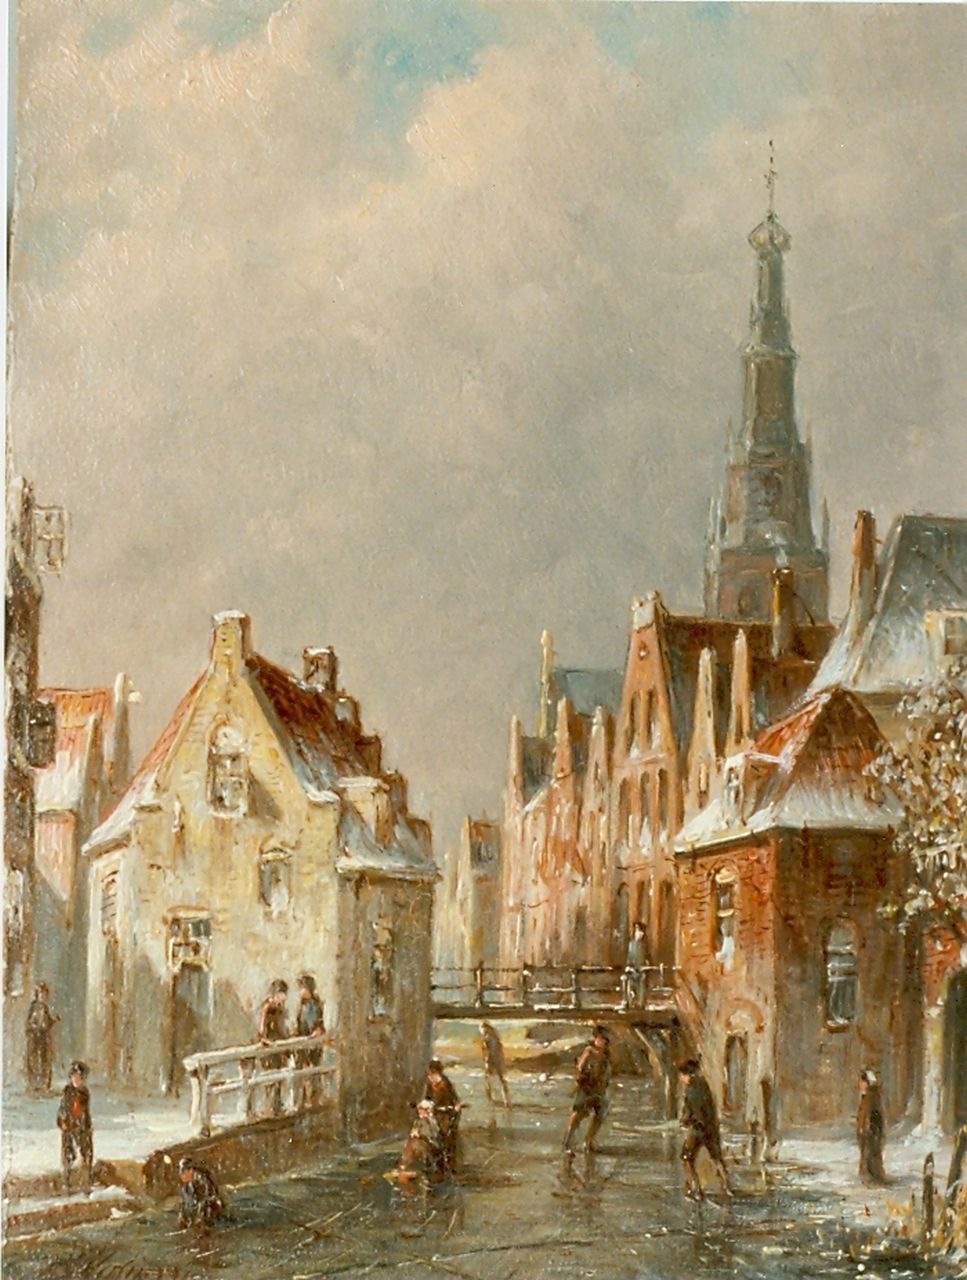 Vertin P.G.  | Petrus Gerardus Vertin, Holland in winter, oil on panel 23.0 x 18.0 cm, signed l.l. and dated '91